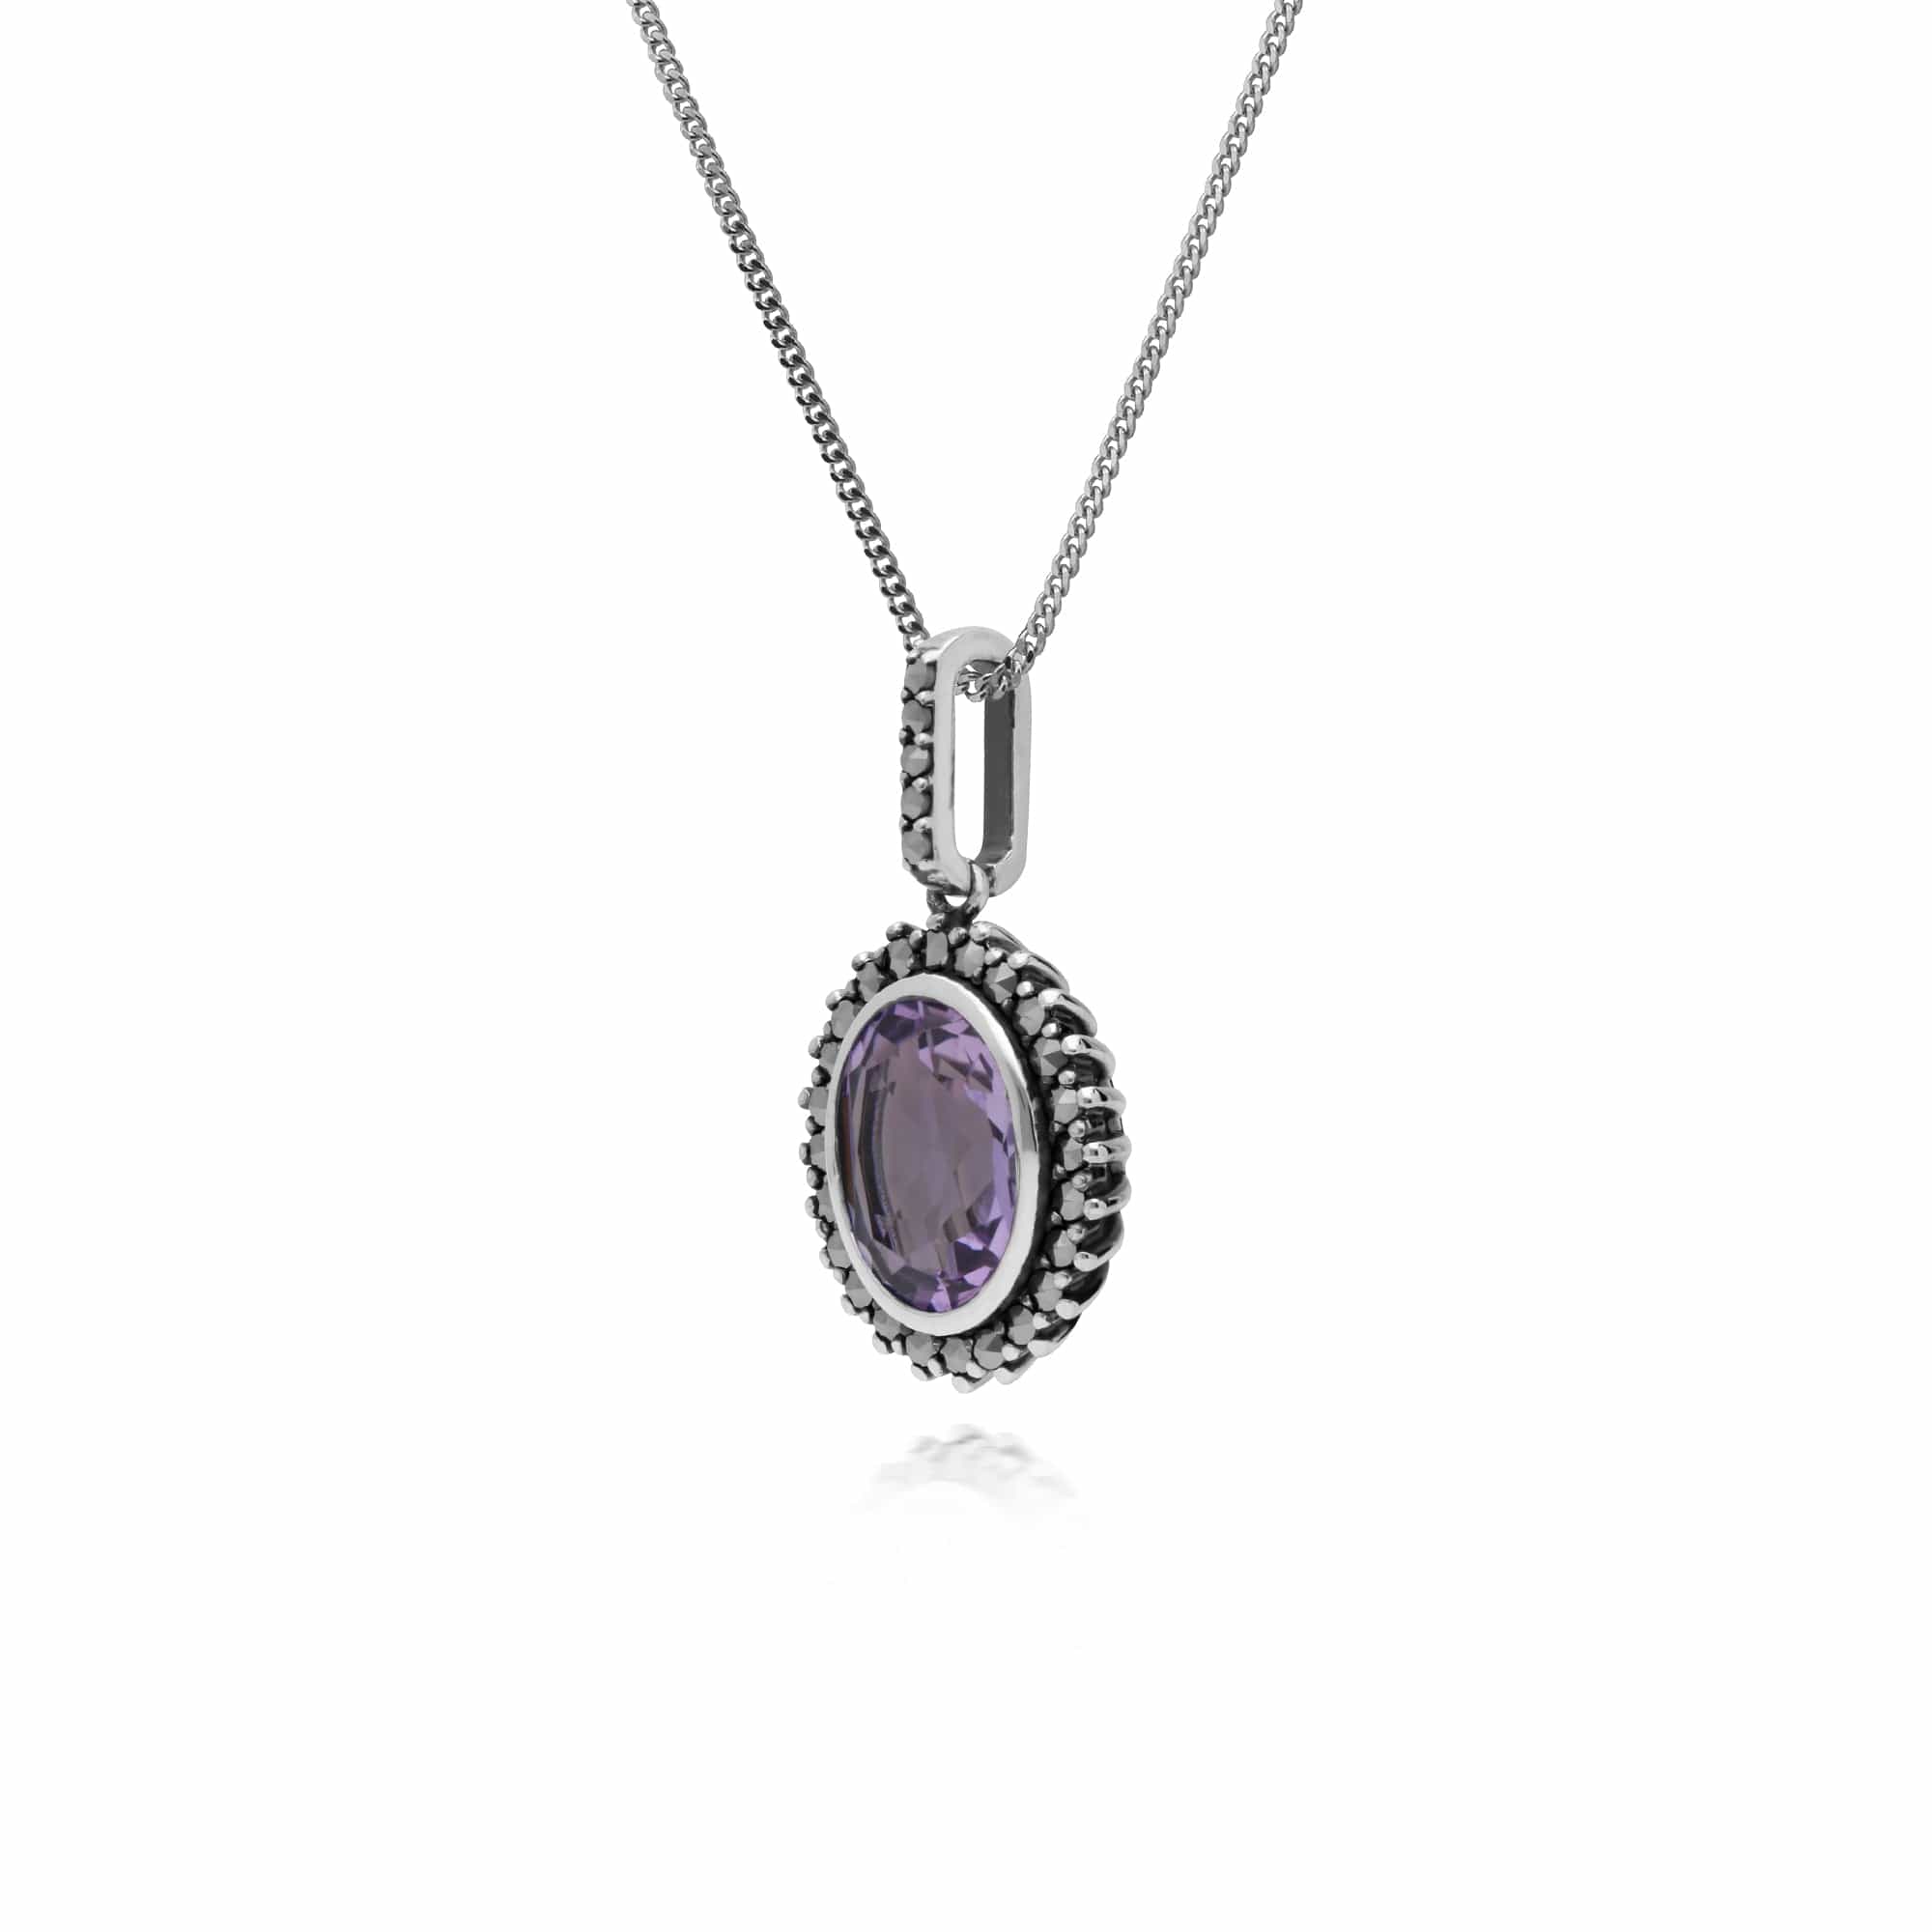 214P301402925 Gemondo Sterling Silver Amethyst & Marcasite Oval Pendant with 45cm Chain 2